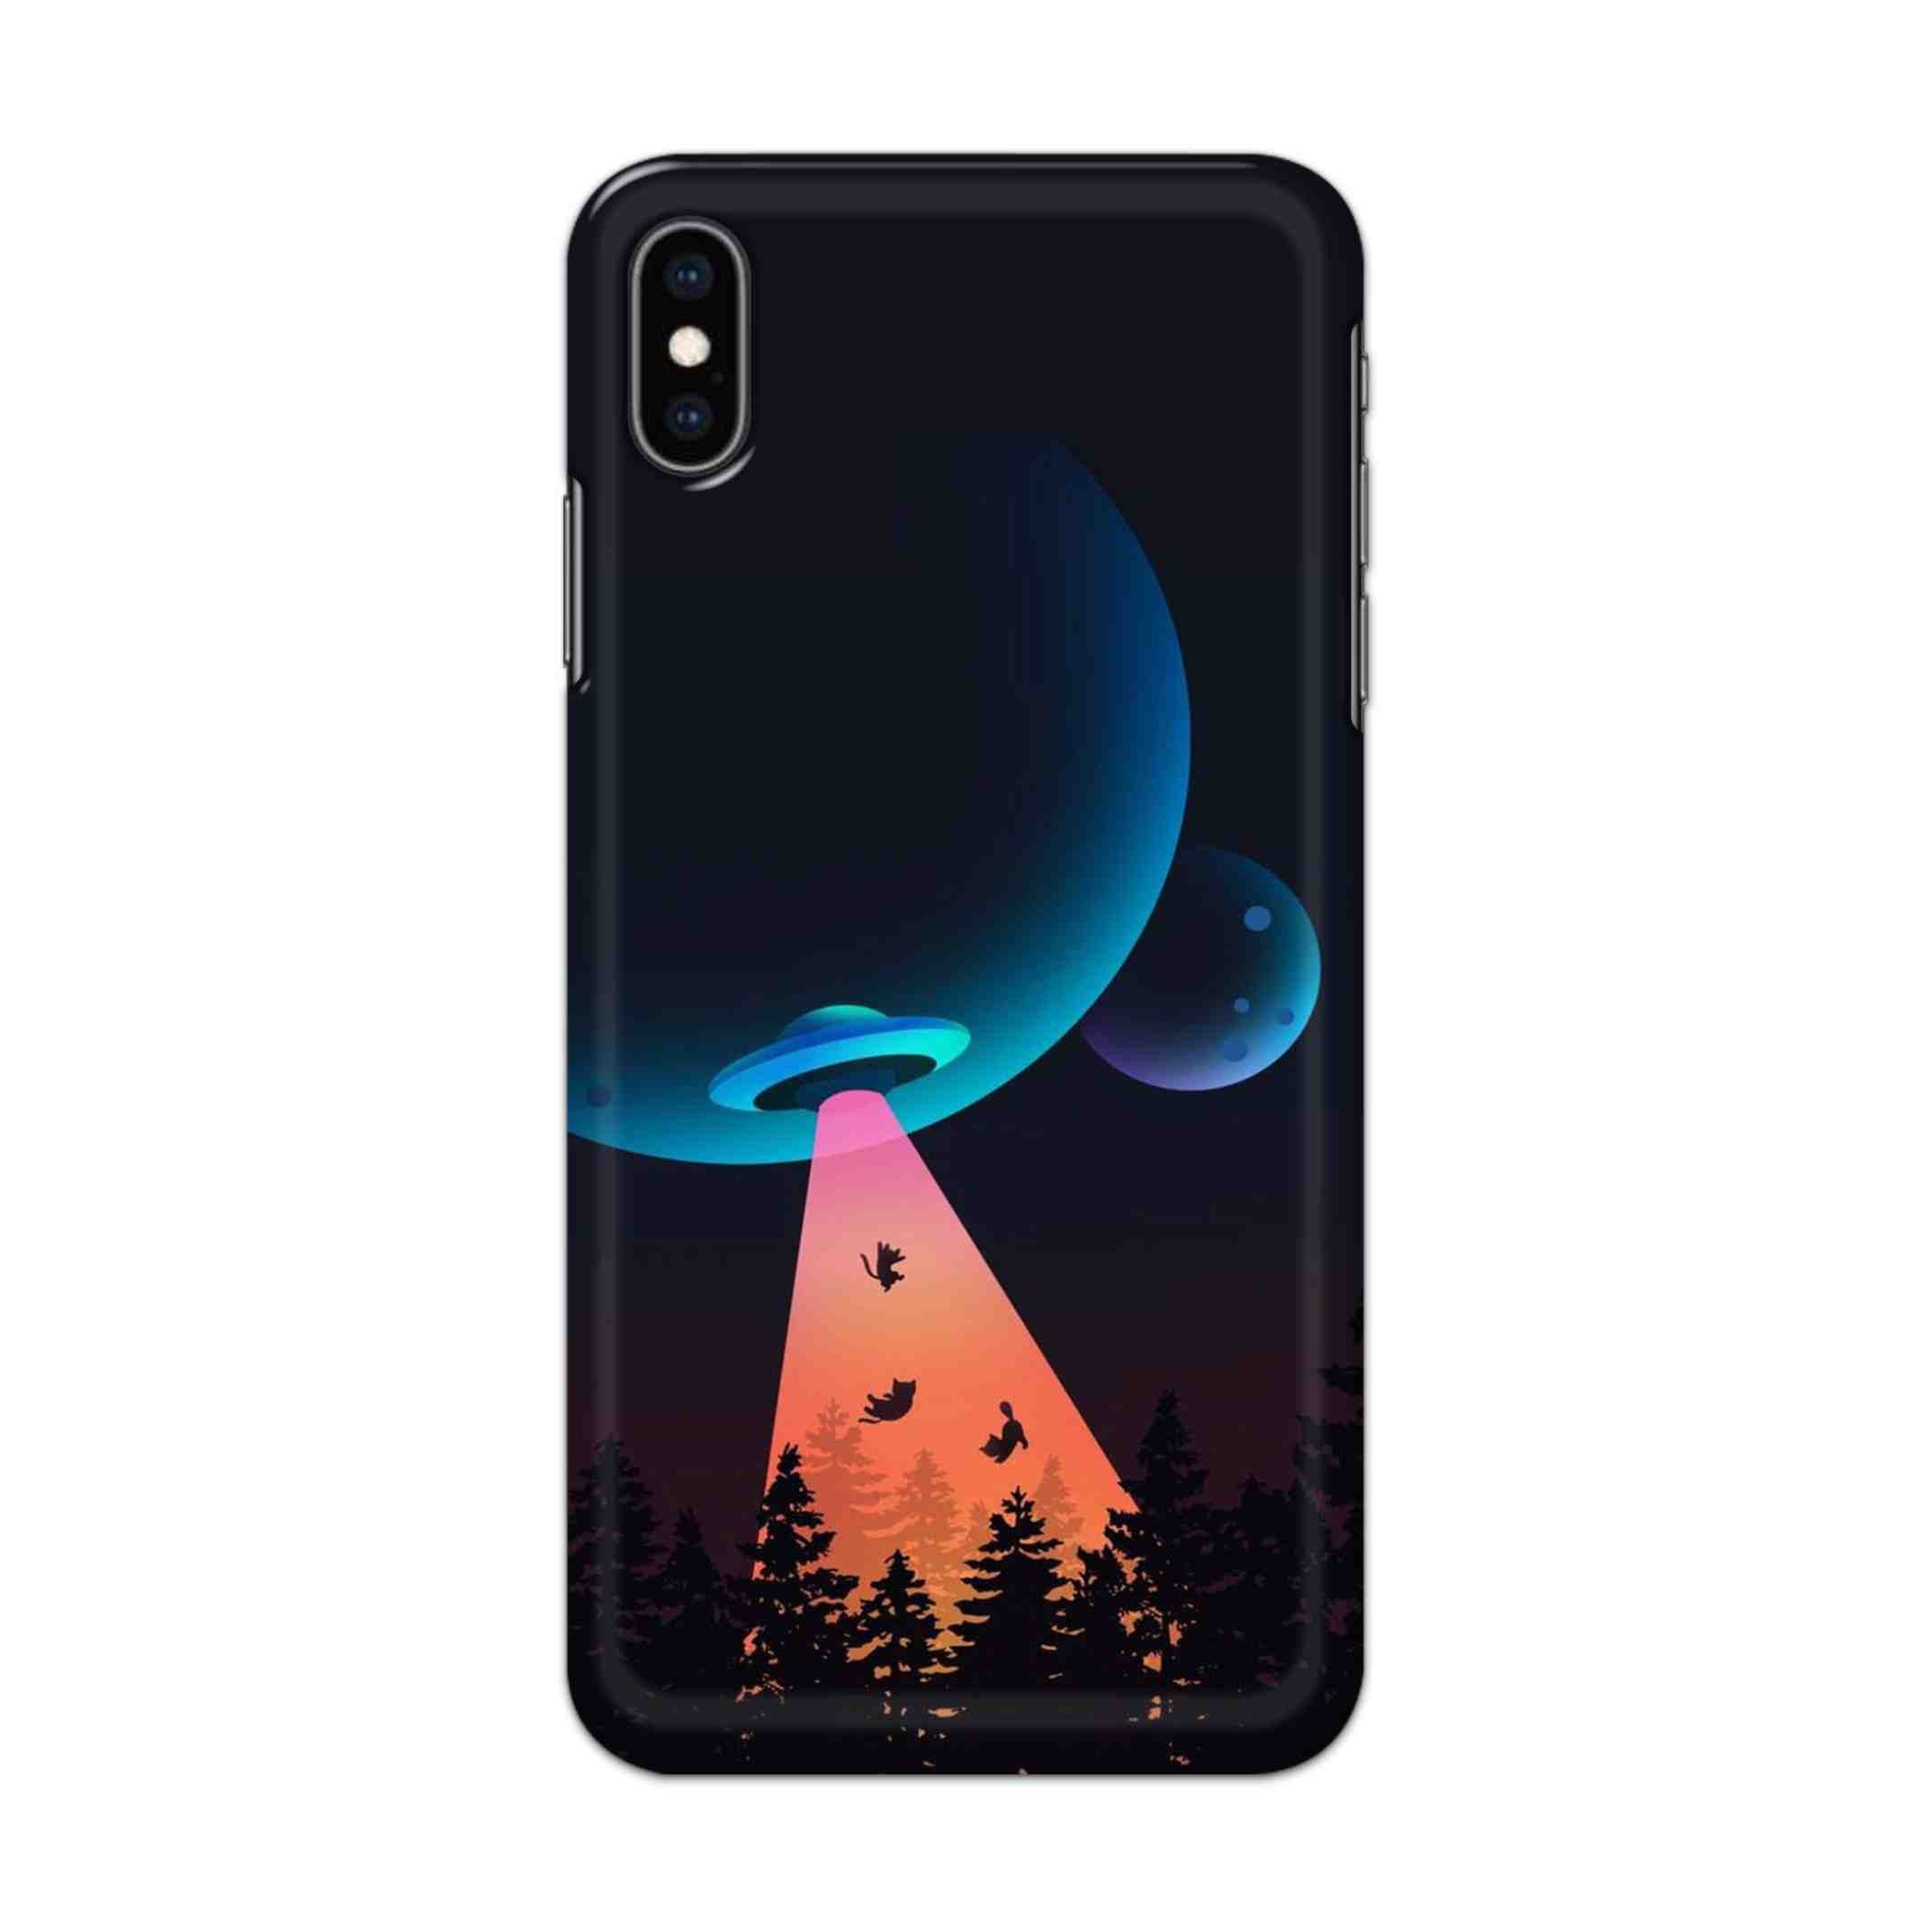 Buy Spaceship Hard Back Mobile Phone Case/Cover For iPhone XS MAX Online